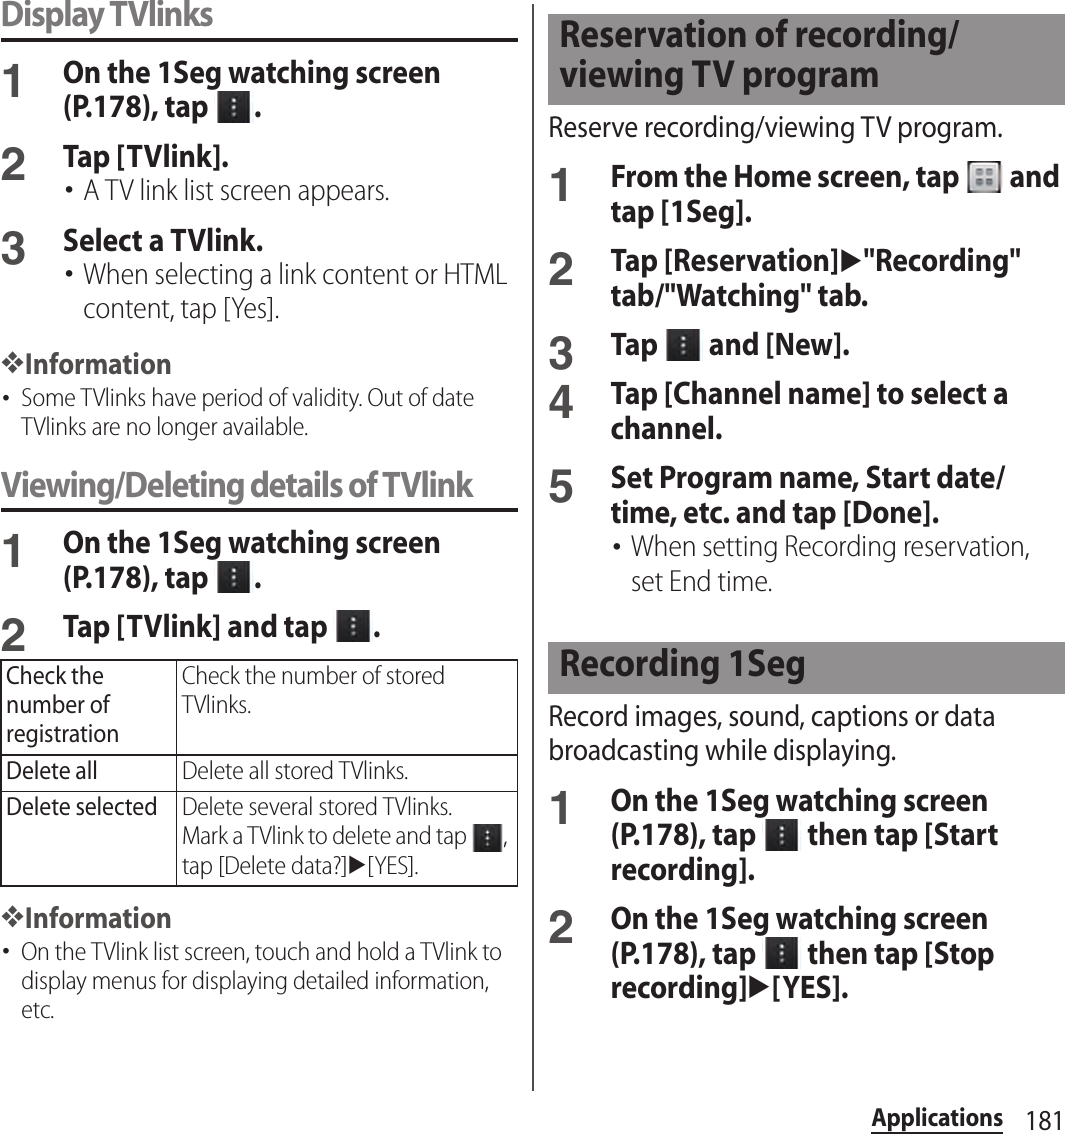 181ApplicationsDisplay TVlinks1On the 1Seg watching screen (P.178), tap  .2Tap [TVlink].･A TV link list screen appears.3Select a TVlink.･When selecting a link content or HTML content, tap [Yes].❖Information･Some TVlinks have period of validity. Out of date TVlinks are no longer available.Viewing/Deleting details of TVlink1On the 1Seg watching screen (P.178), tap  .2Tap [TVlink] and tap  .❖Information･On the TVlink list screen, touch and hold a TVlink to display menus for displaying detailed information, etc.Reserve recording/viewing TV program.1From the Home screen, tap   and tap [1Seg].2Tap [Reservation]u&quot;Recording&quot; tab/&quot;Watching&quot; tab.3Tap   and [New].4Tap [Channel name] to select a channel.5Set Program name, Start date/time, etc. and tap [Done].･When setting Recording reservation, set End time.Record images, sound, captions or data broadcasting while displaying.1On the 1Seg watching screen (P.178), tap   then tap [Start recording].2On the 1Seg watching screen (P.178), tap   then tap [Stop recording]u[YES].Check the number of registrationCheck the number of stored TVlinks.Delete allDelete all stored TVlinks.Delete selectedDelete several stored TVlinks.Mark a TVlink to delete and tap  , tap [Delete data?]u[YES].Reservation of recording/viewing TV programRecording 1Seg